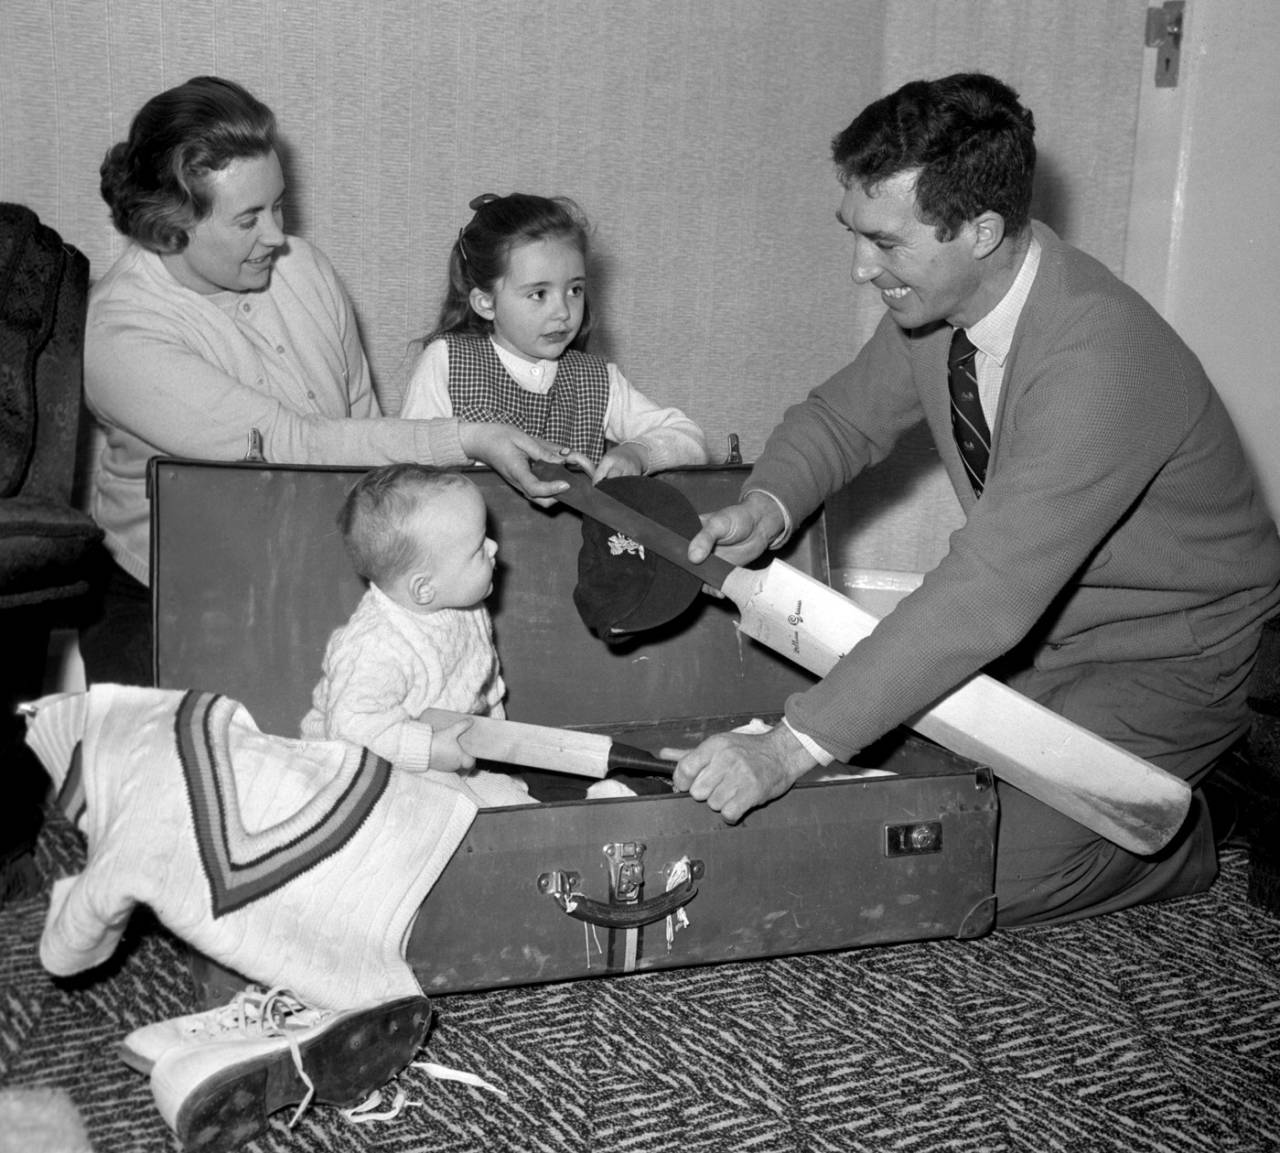 Fred Titmus gets help from his son Mark, daughter Dawn and wife Jean in packing for his tour to India, Enfield, December 18, 1963